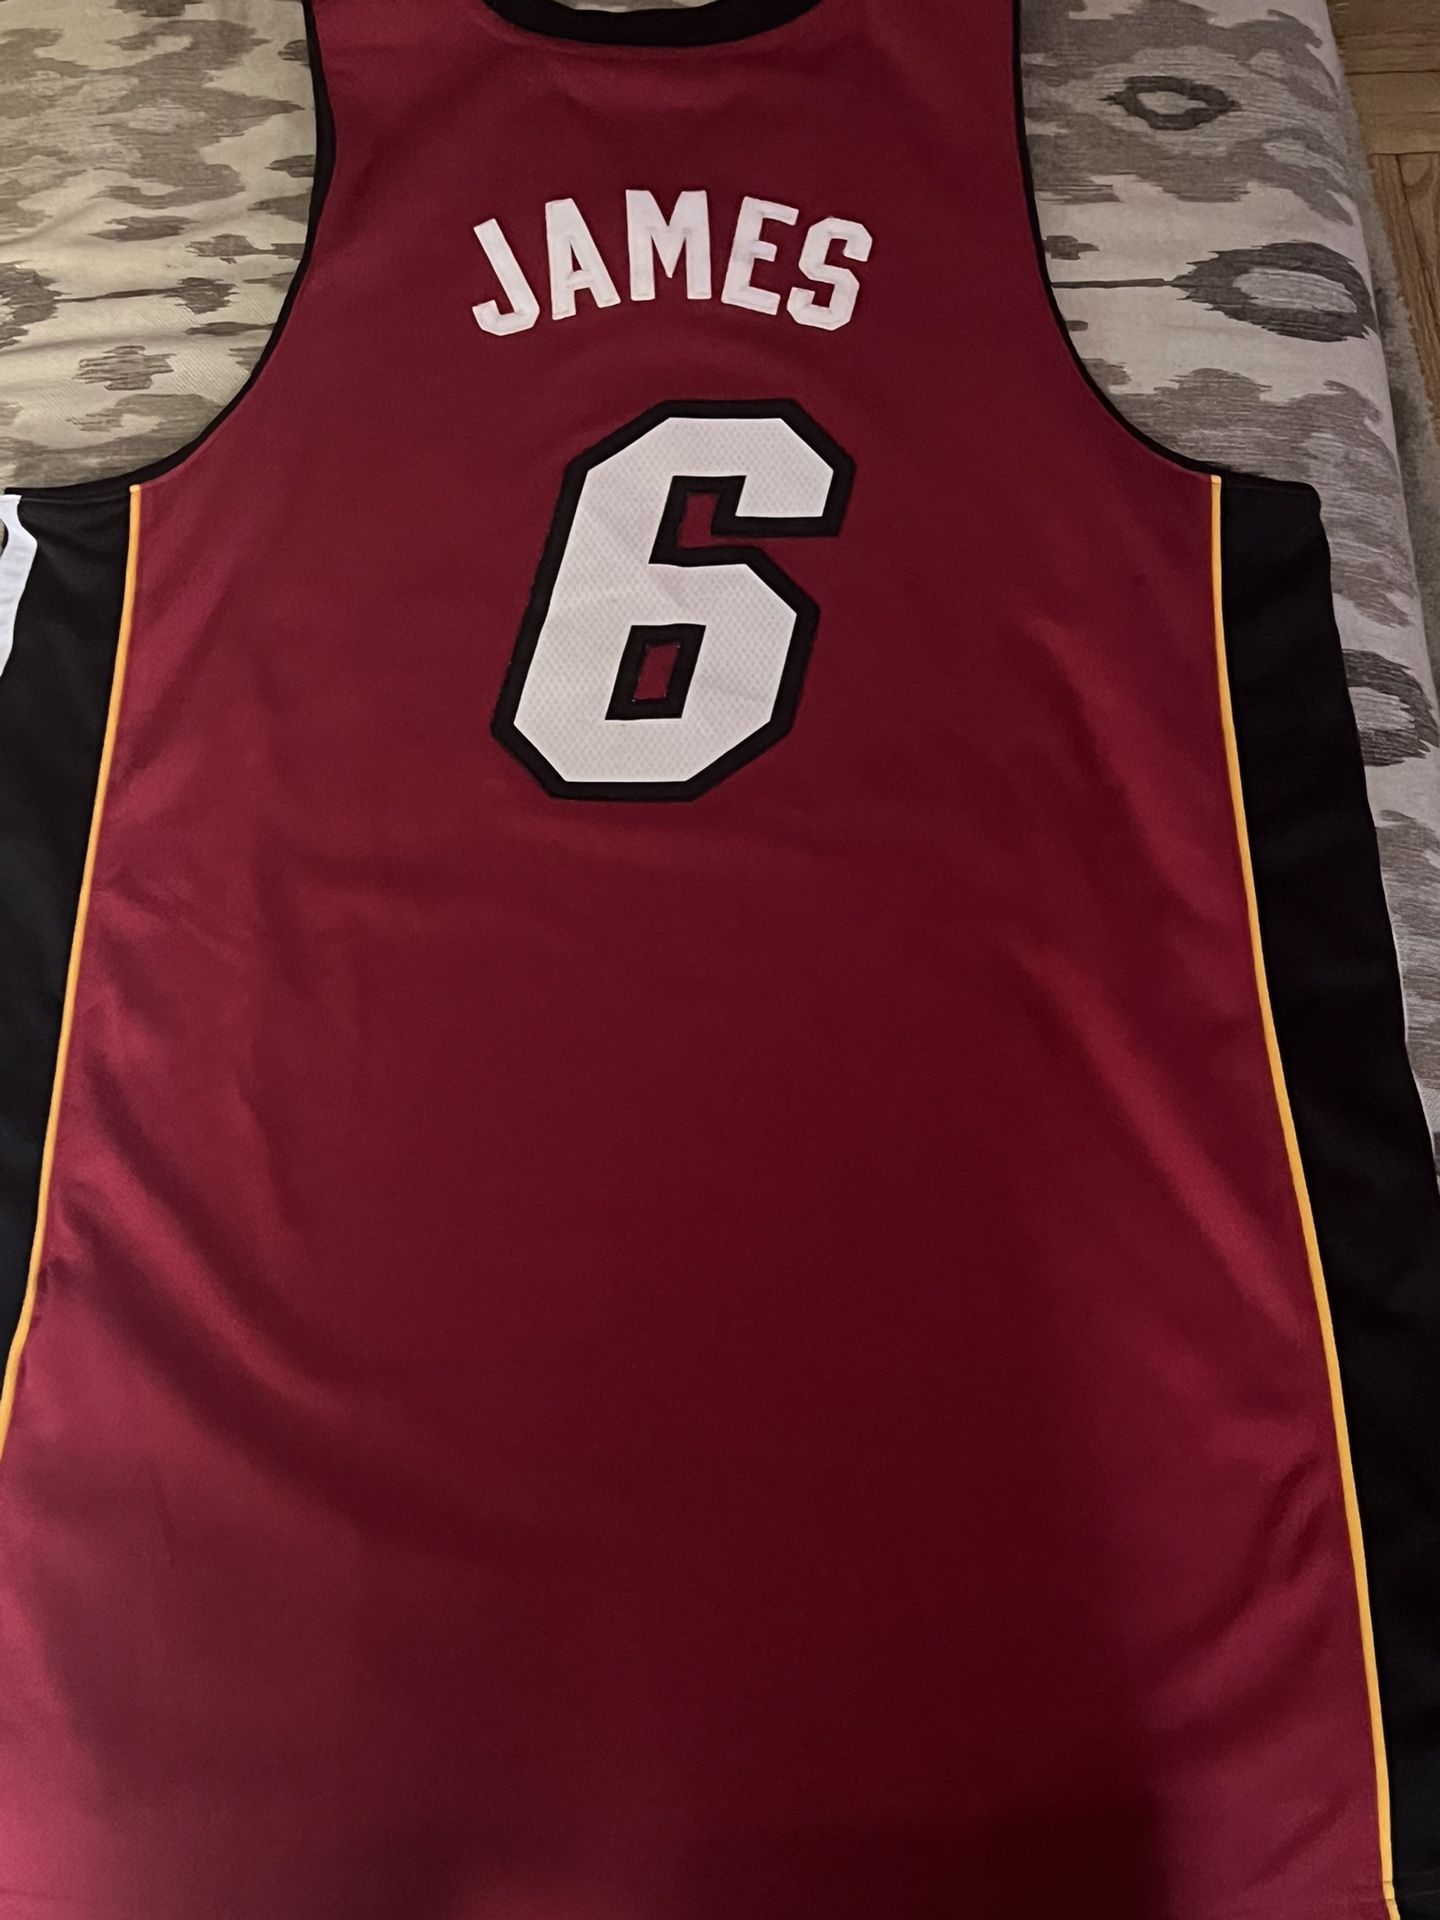 NBA LeBron James Miami Heat jersey for Sale in Chicago, IL - OfferUp